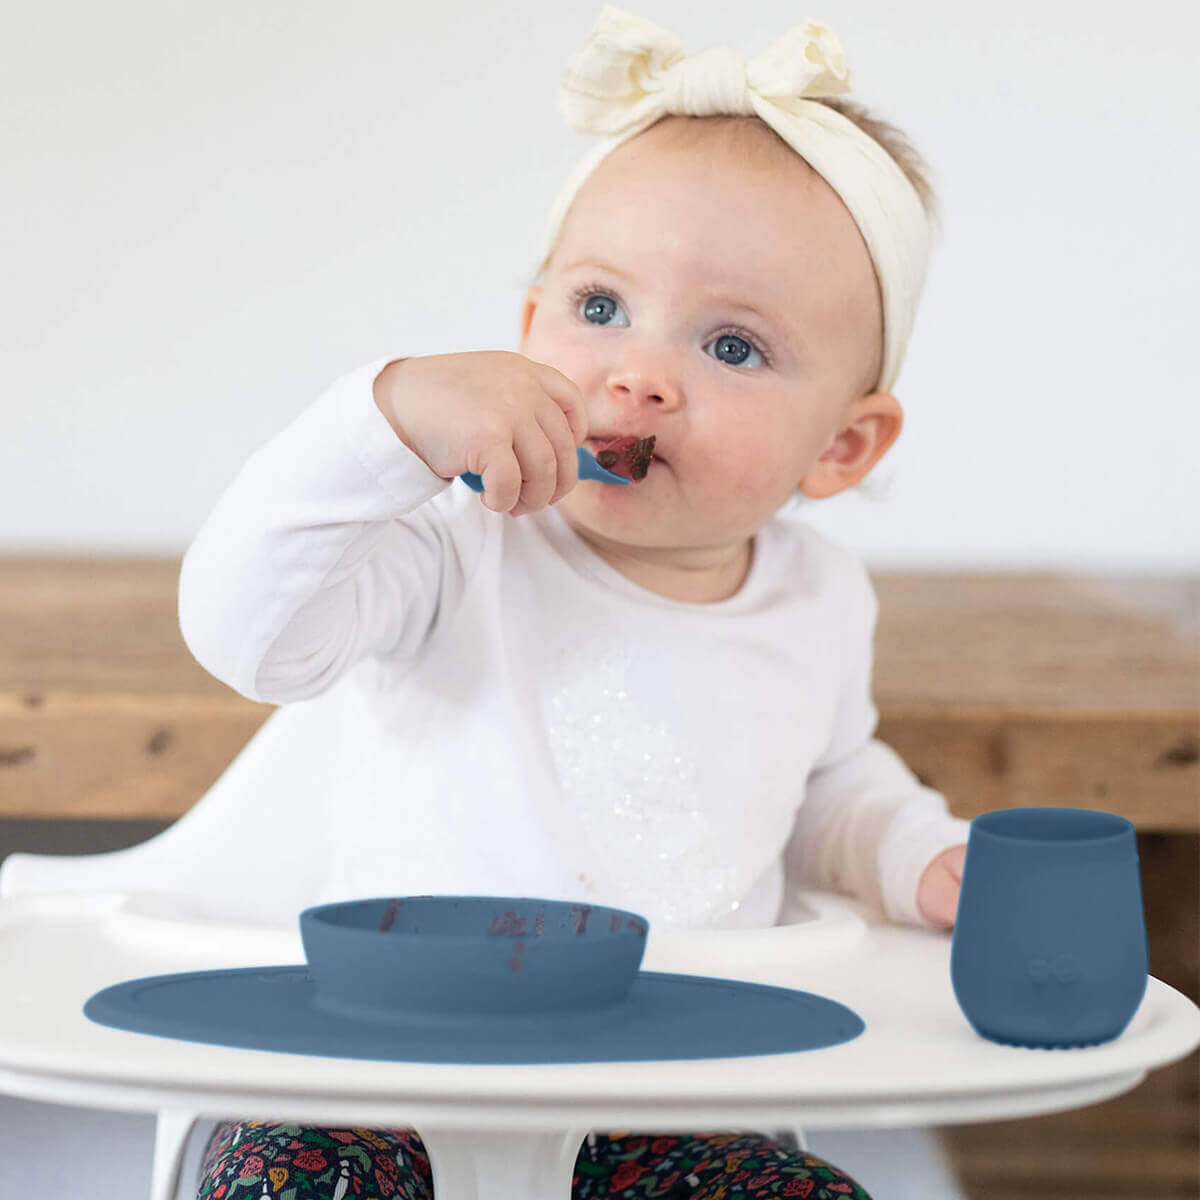 First Foods Set in Indigo by ezpz / The Original All-In-One Silicone Plates & Placemats that Stick to the Table